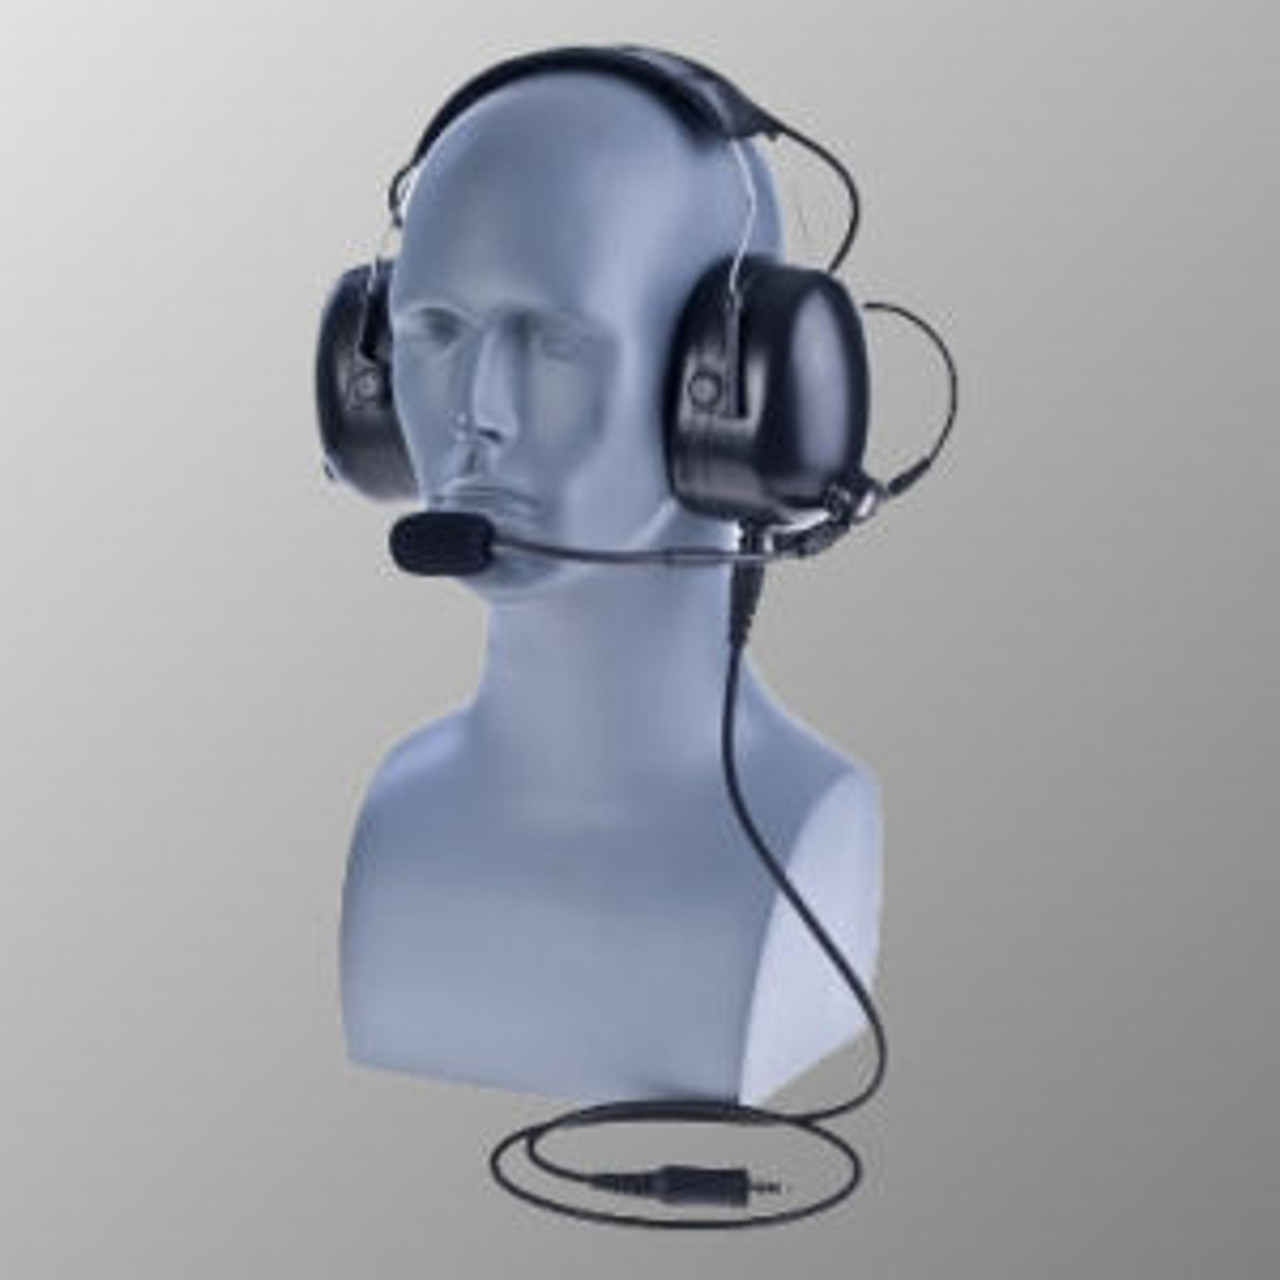 Motorola P50 (6 Cell) Over The Head Double Muff Headset